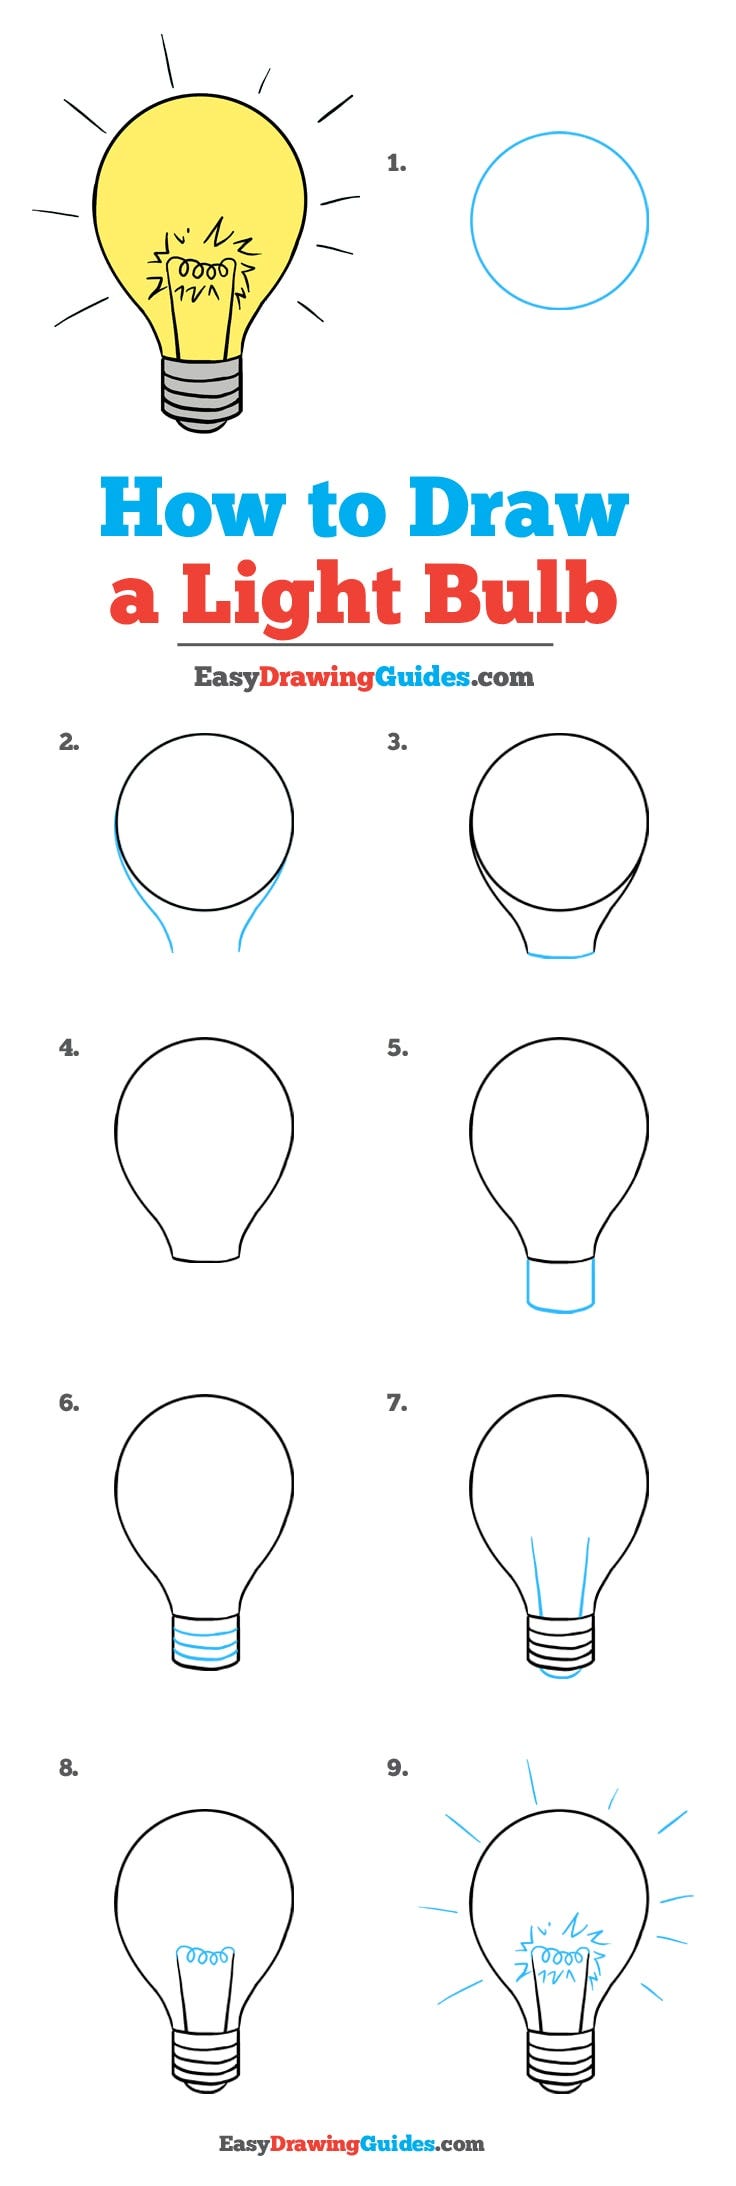 How to Draw a Light Bulb | by Easy Drawing Guides | Medium